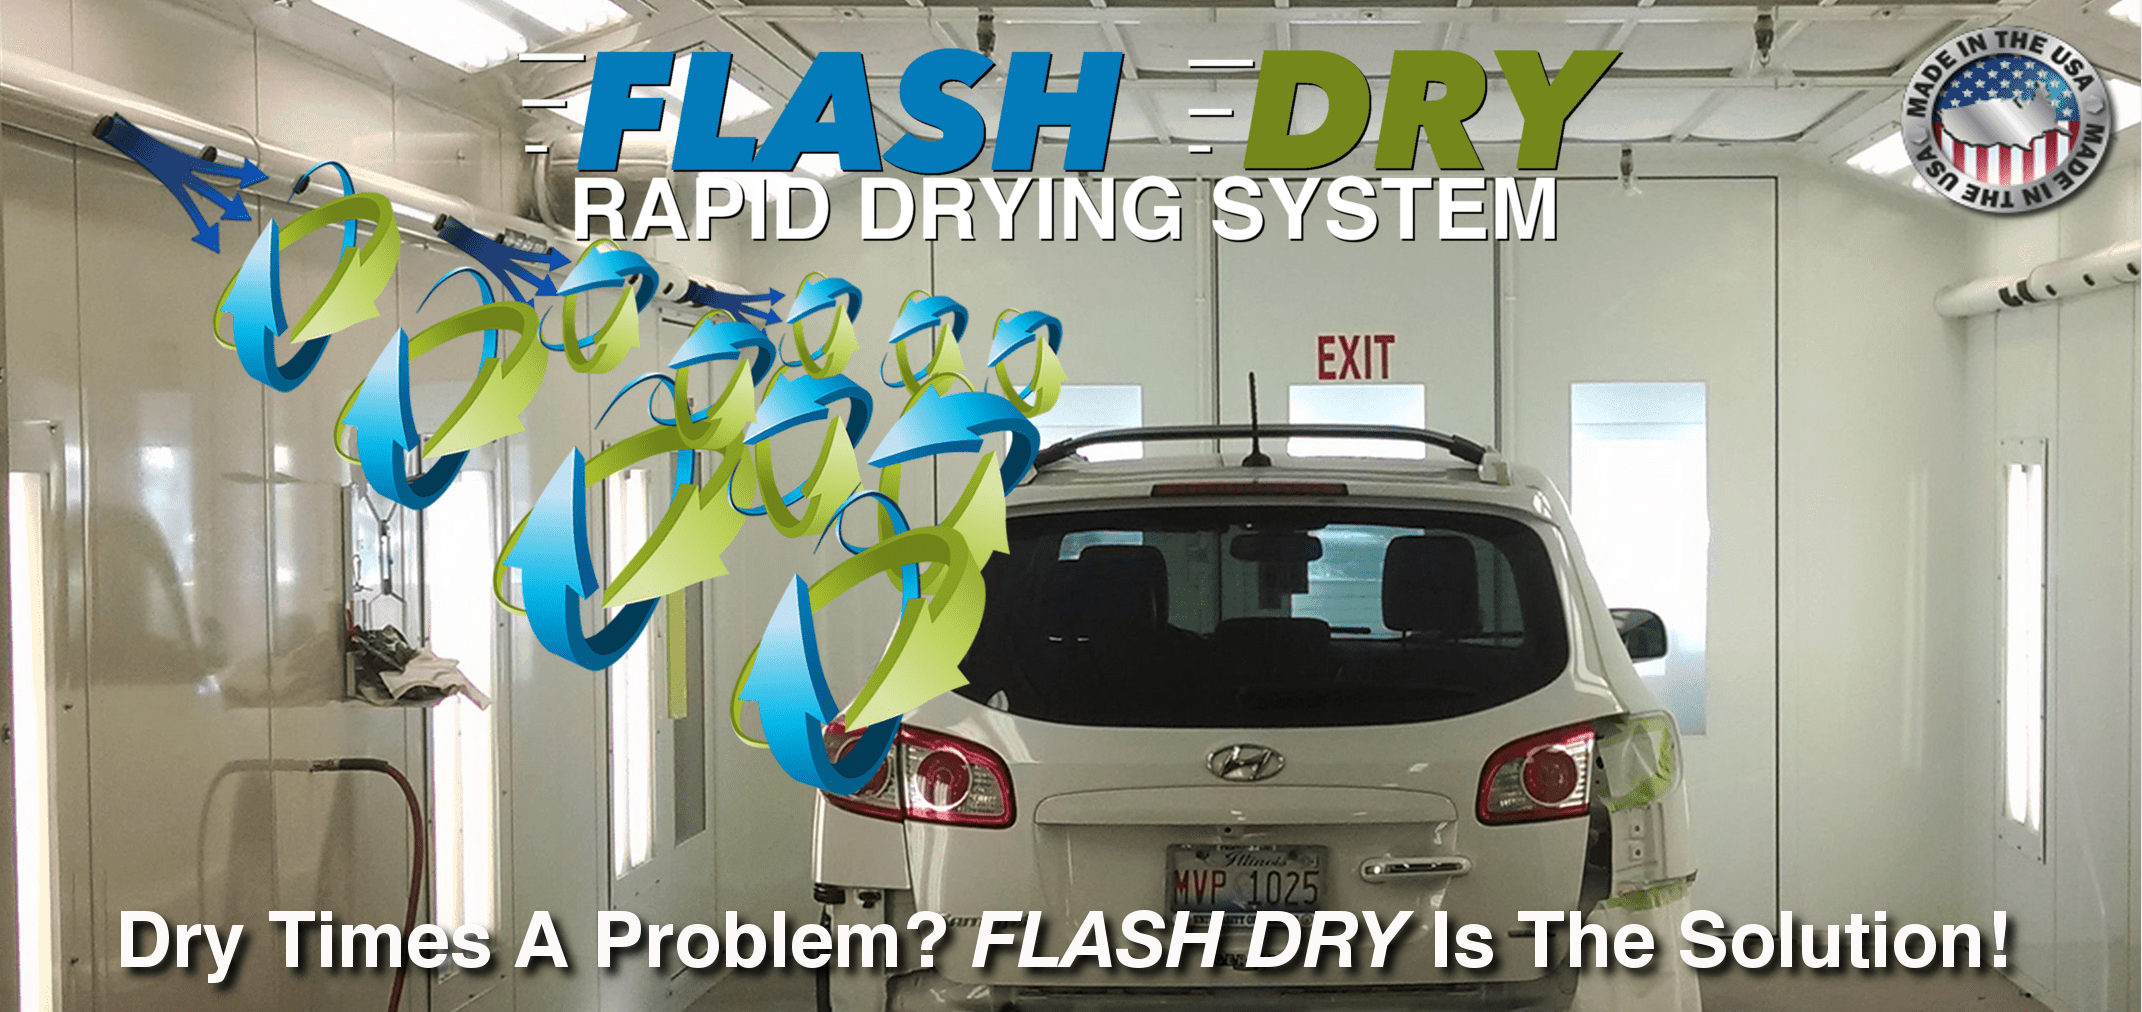 Flash Dry - Rapid Drying System